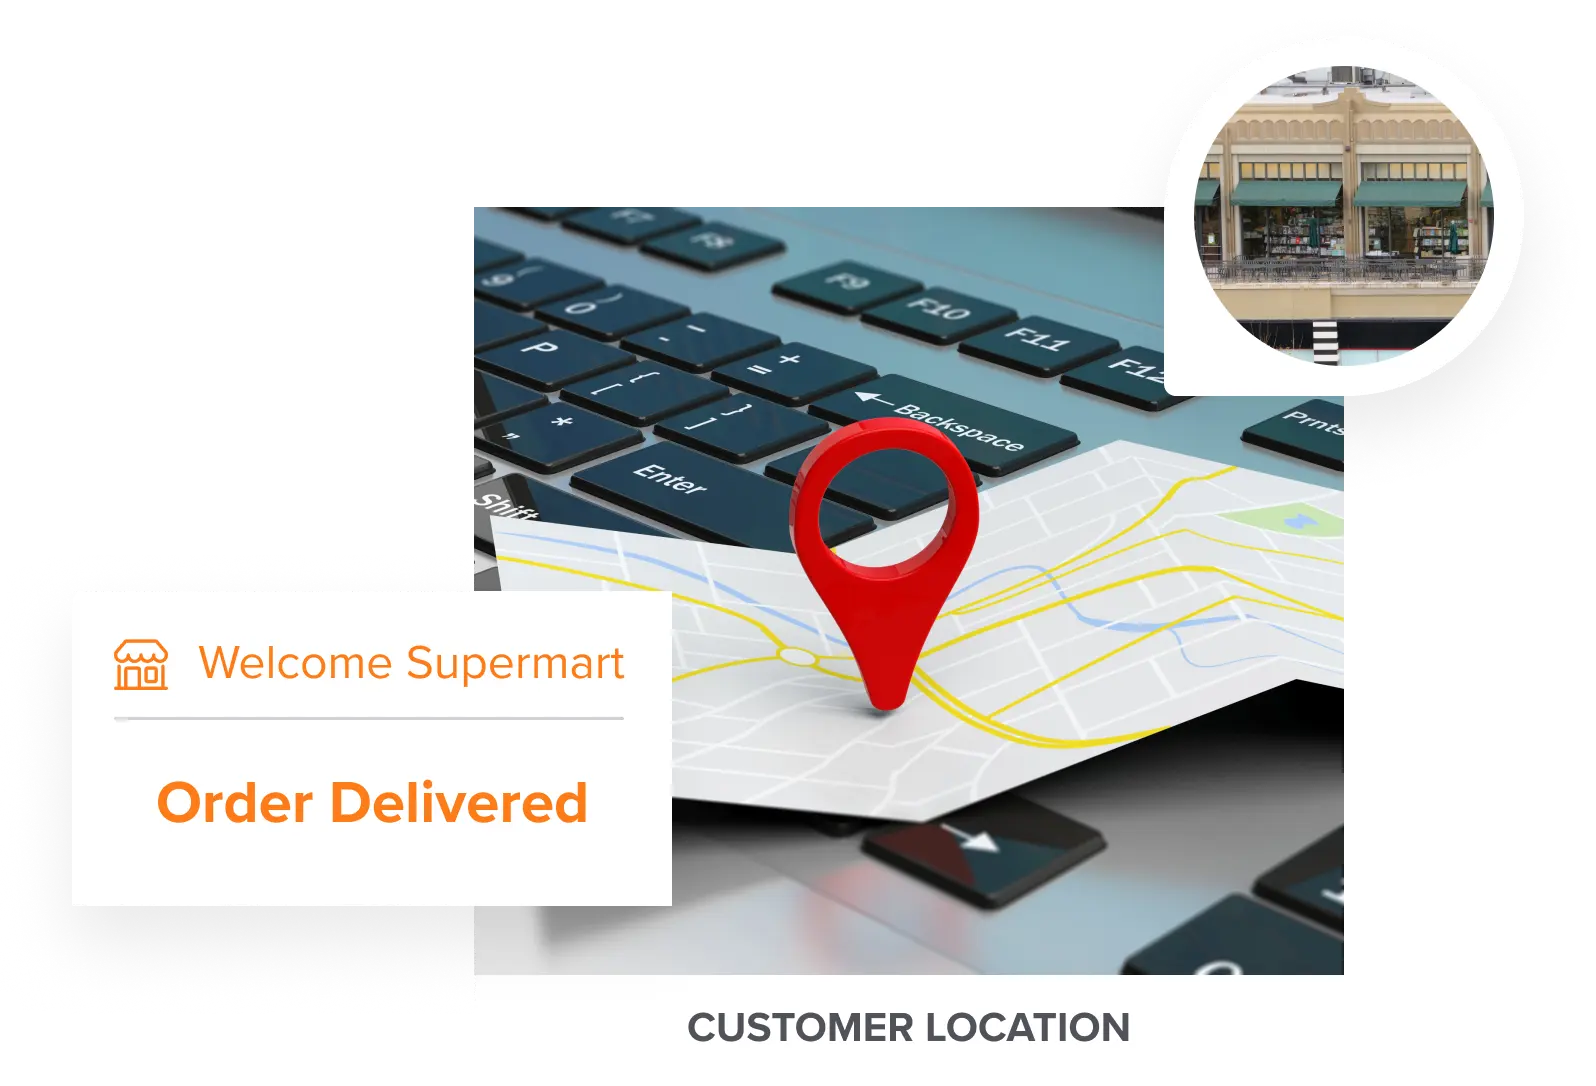 distributo-same-day-delivery-customer-location-for-fast-delivery